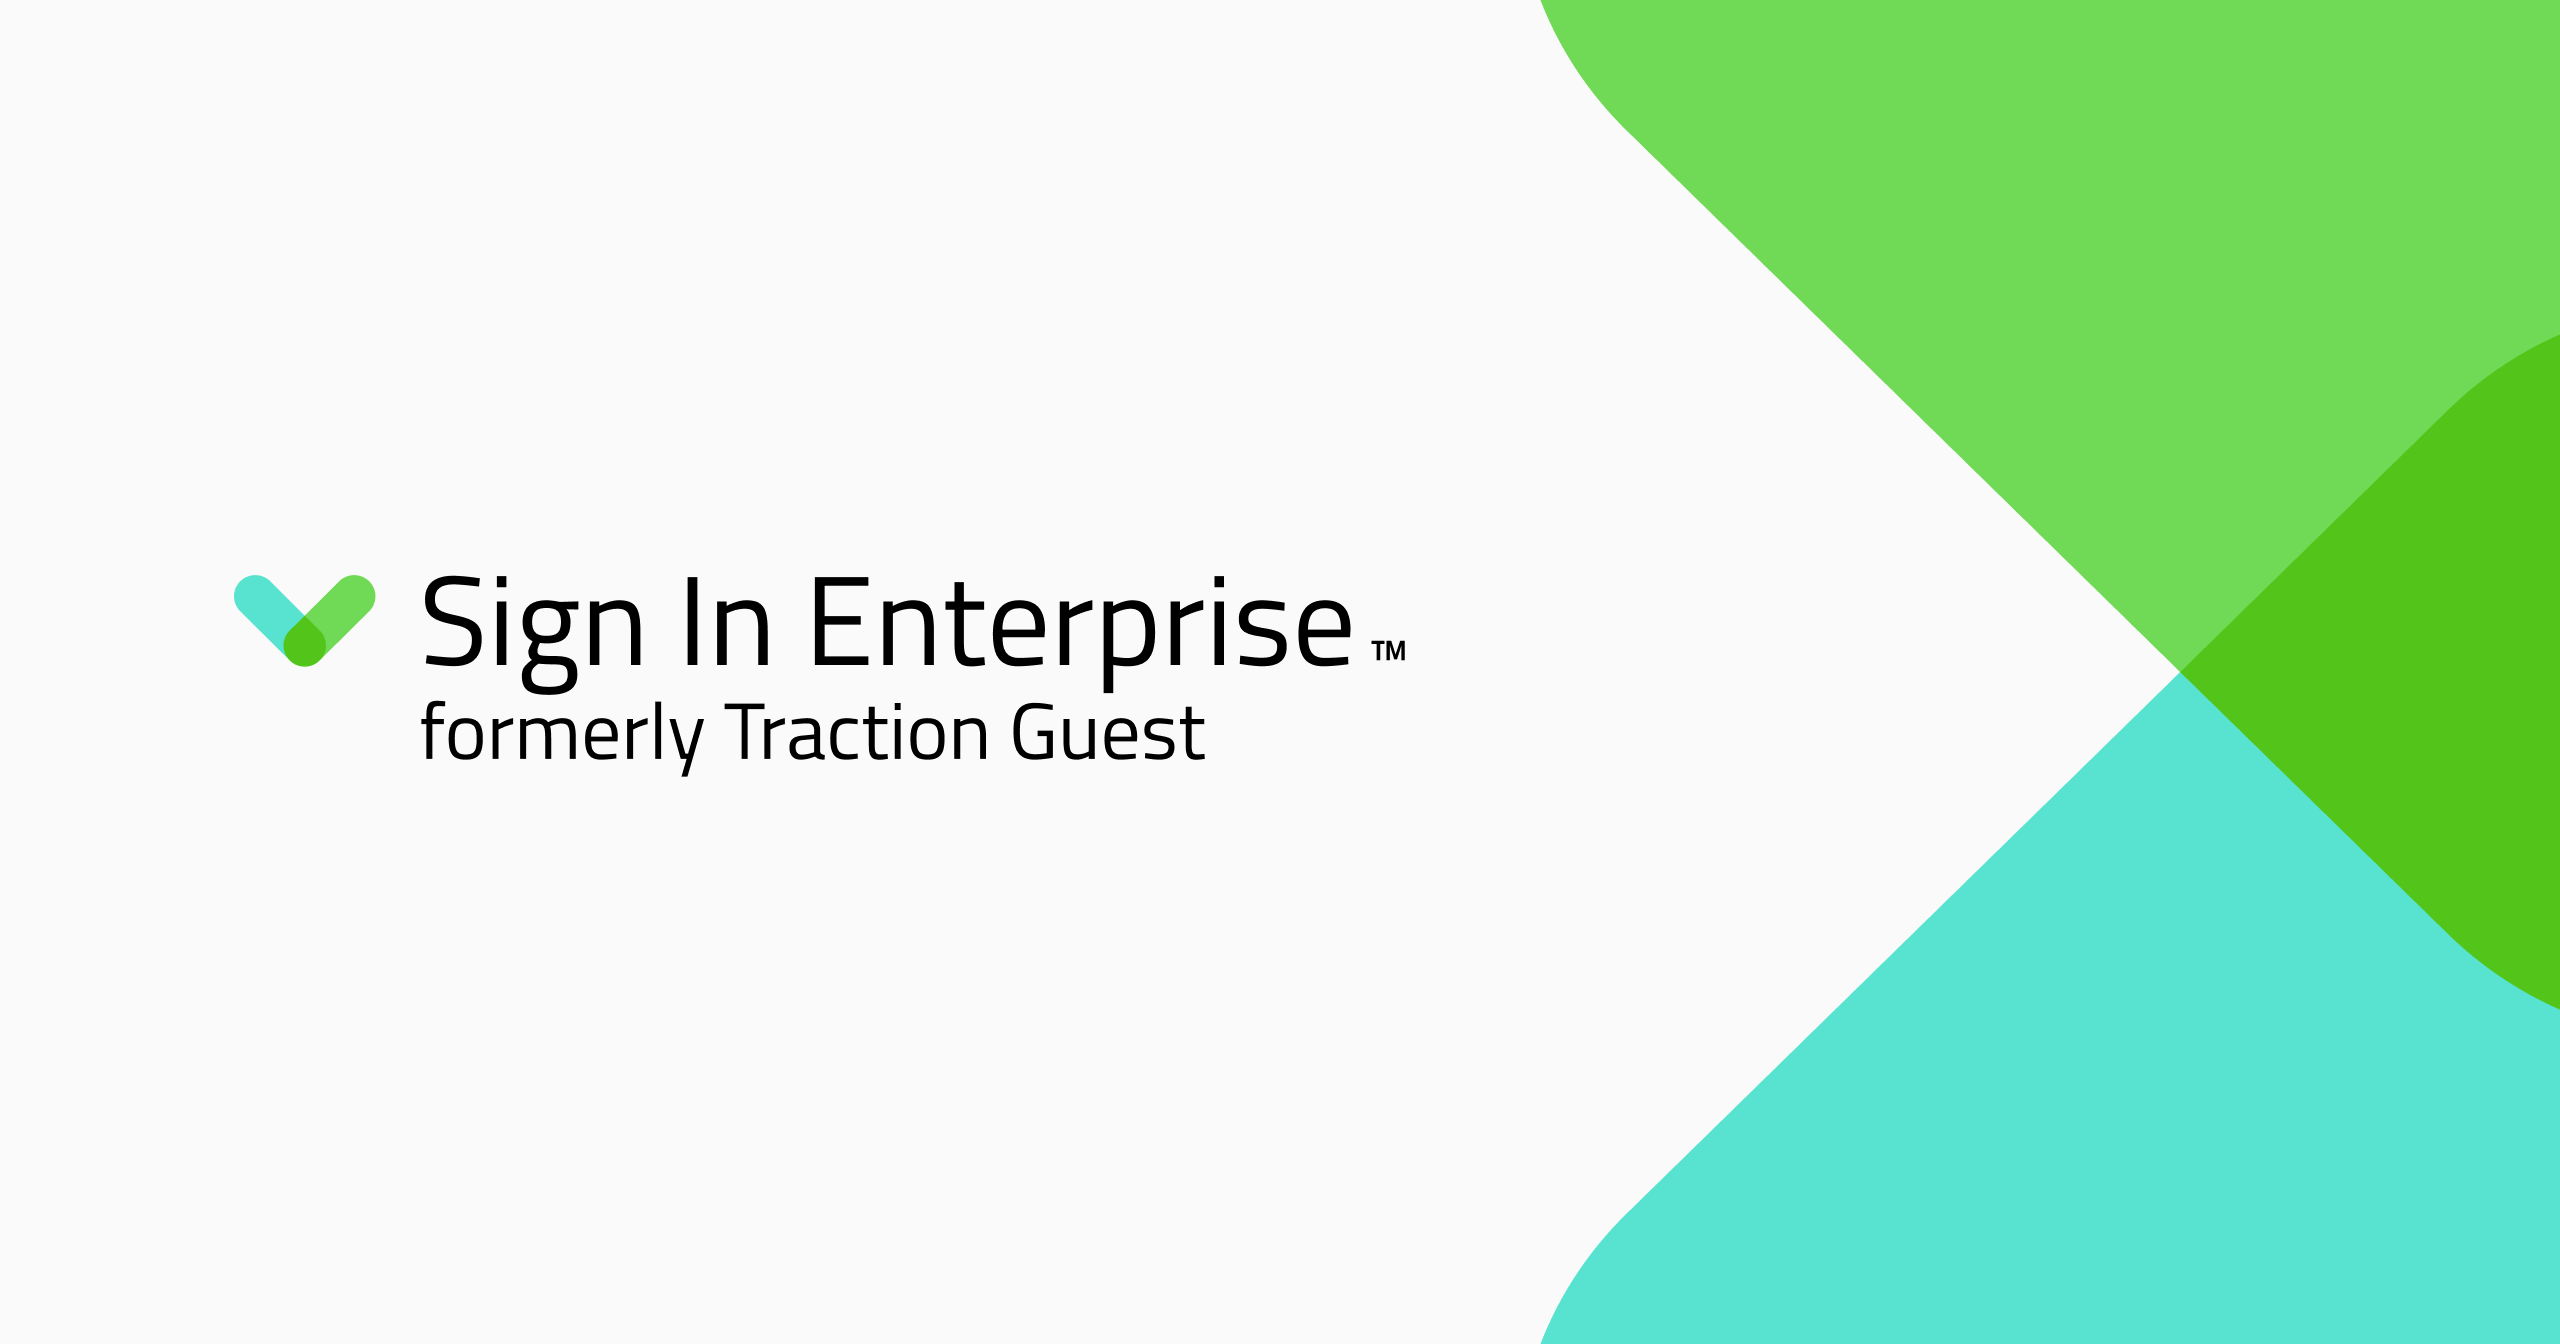 Behind Sign In Enterprise’s new visual identity Photo